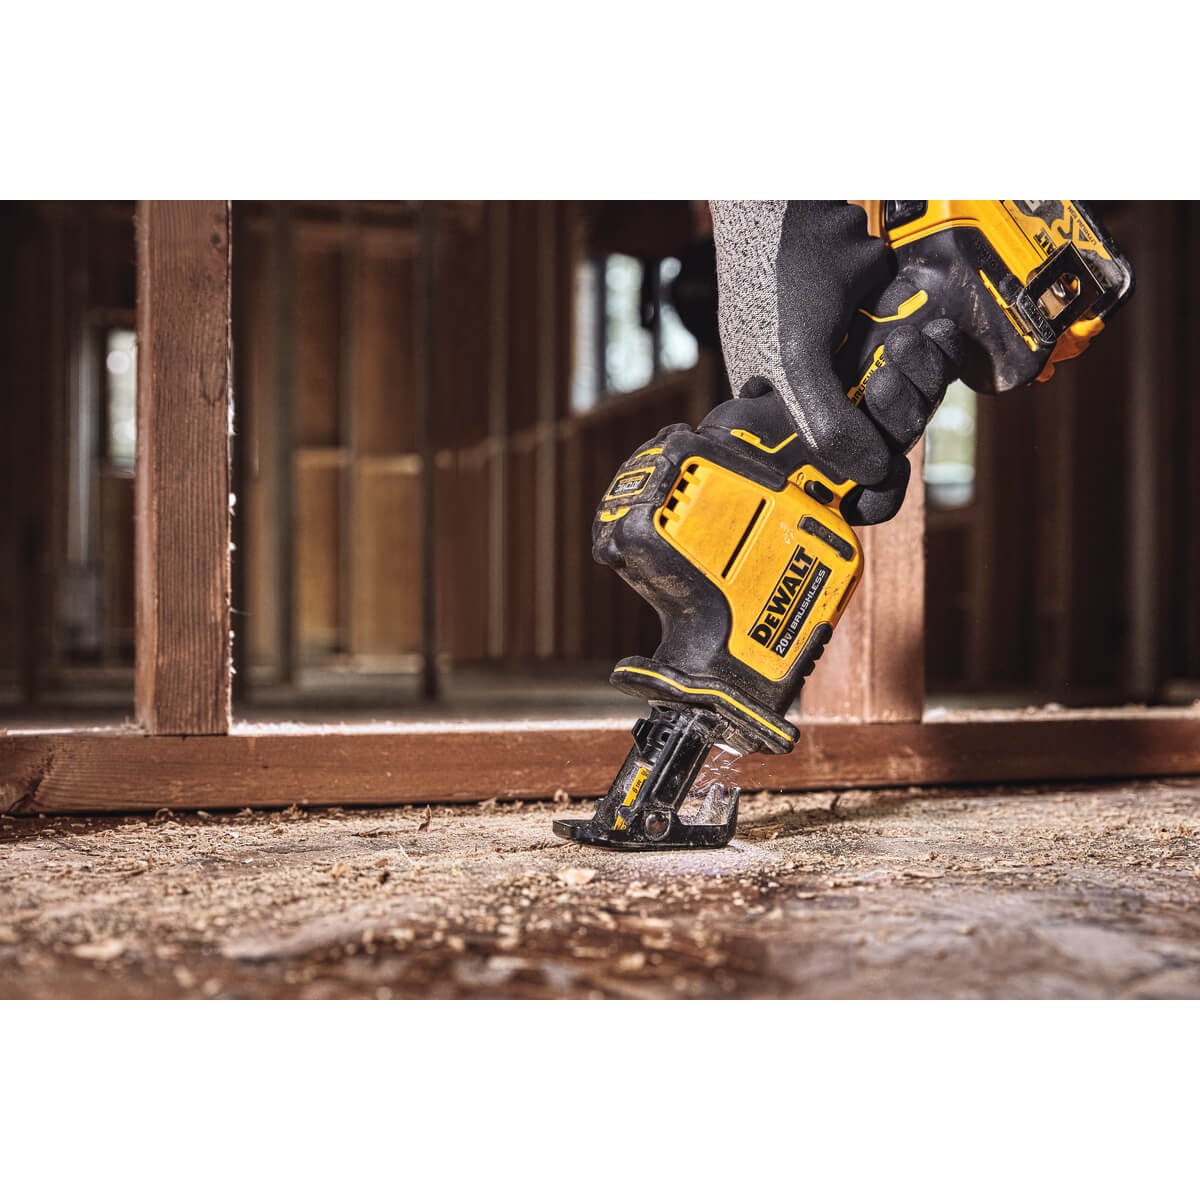 DEWALT DCS369B ATOMIC 20V MAX* CORDLESS ONE-HANDED RECIPROCATING SAW (TOOL ONLY)